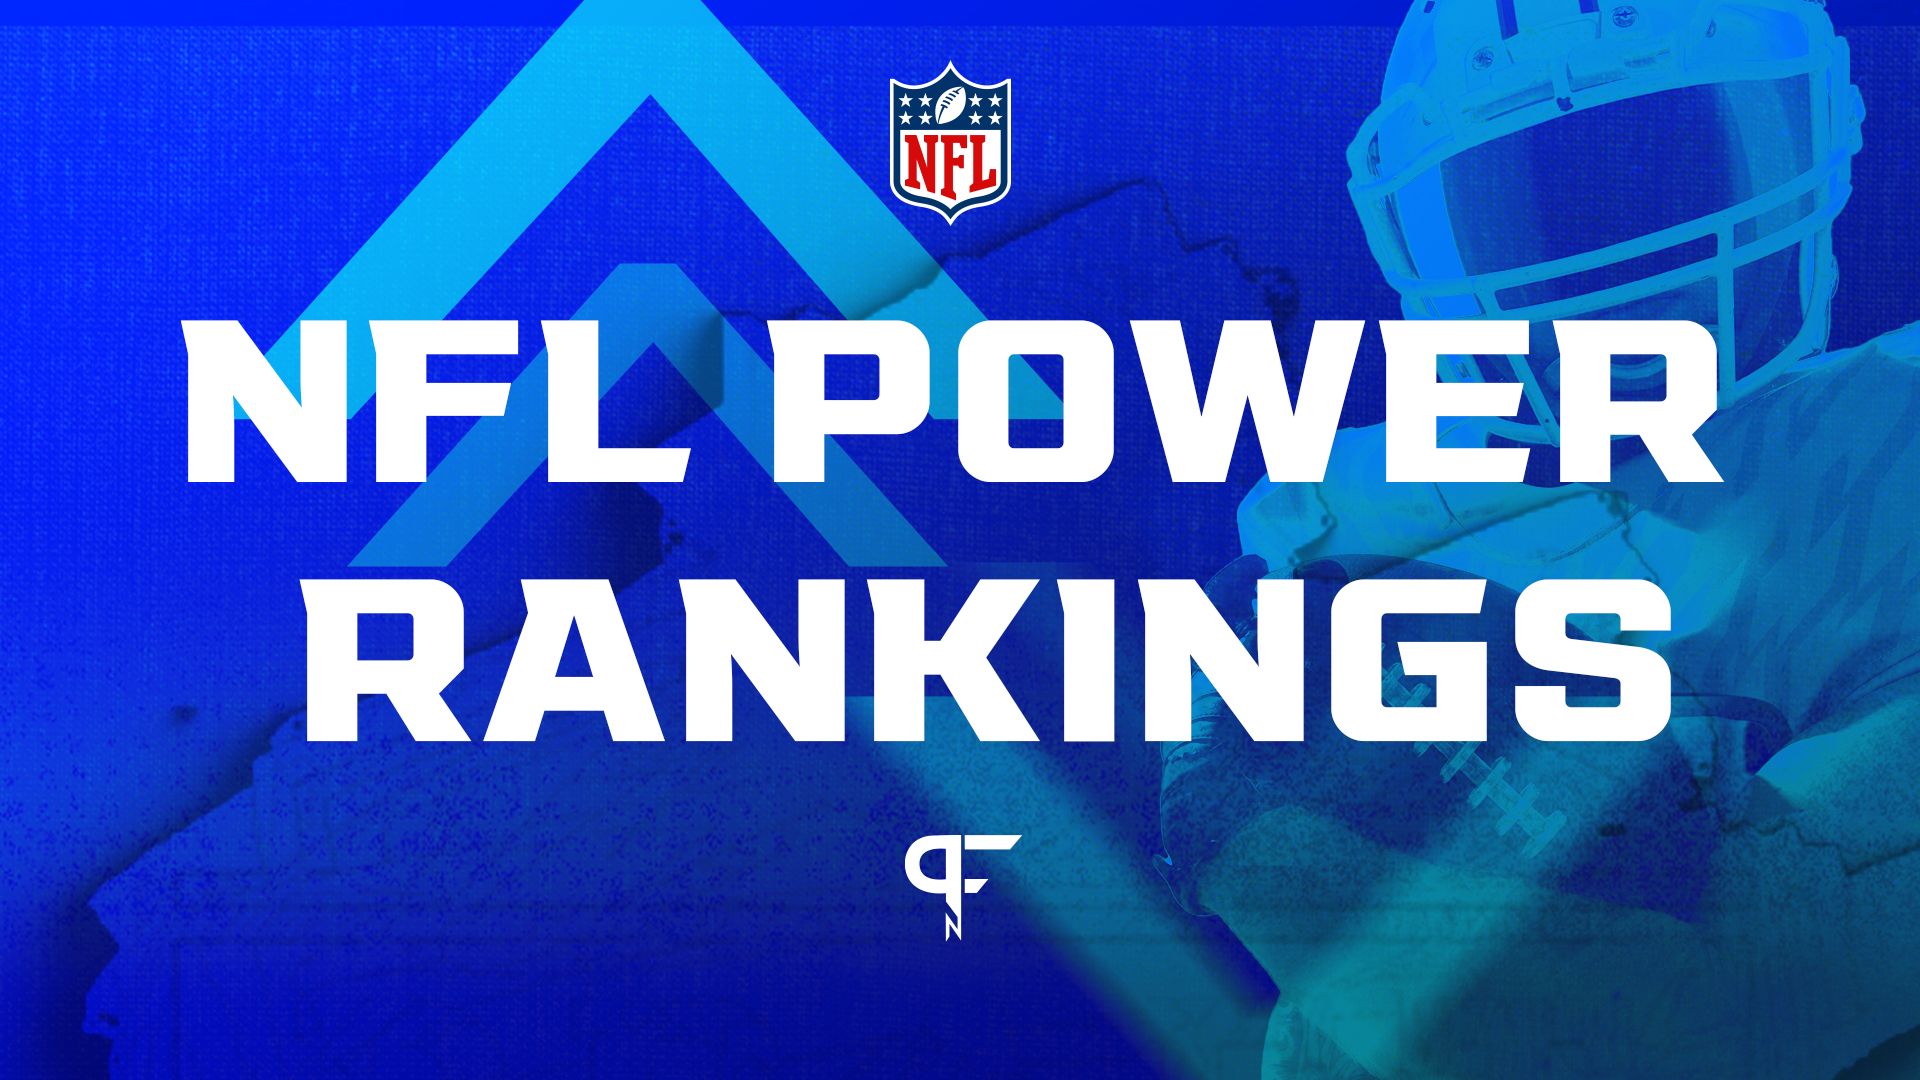 NFL power rankings: Chiefs at top, Packers and Bills follow